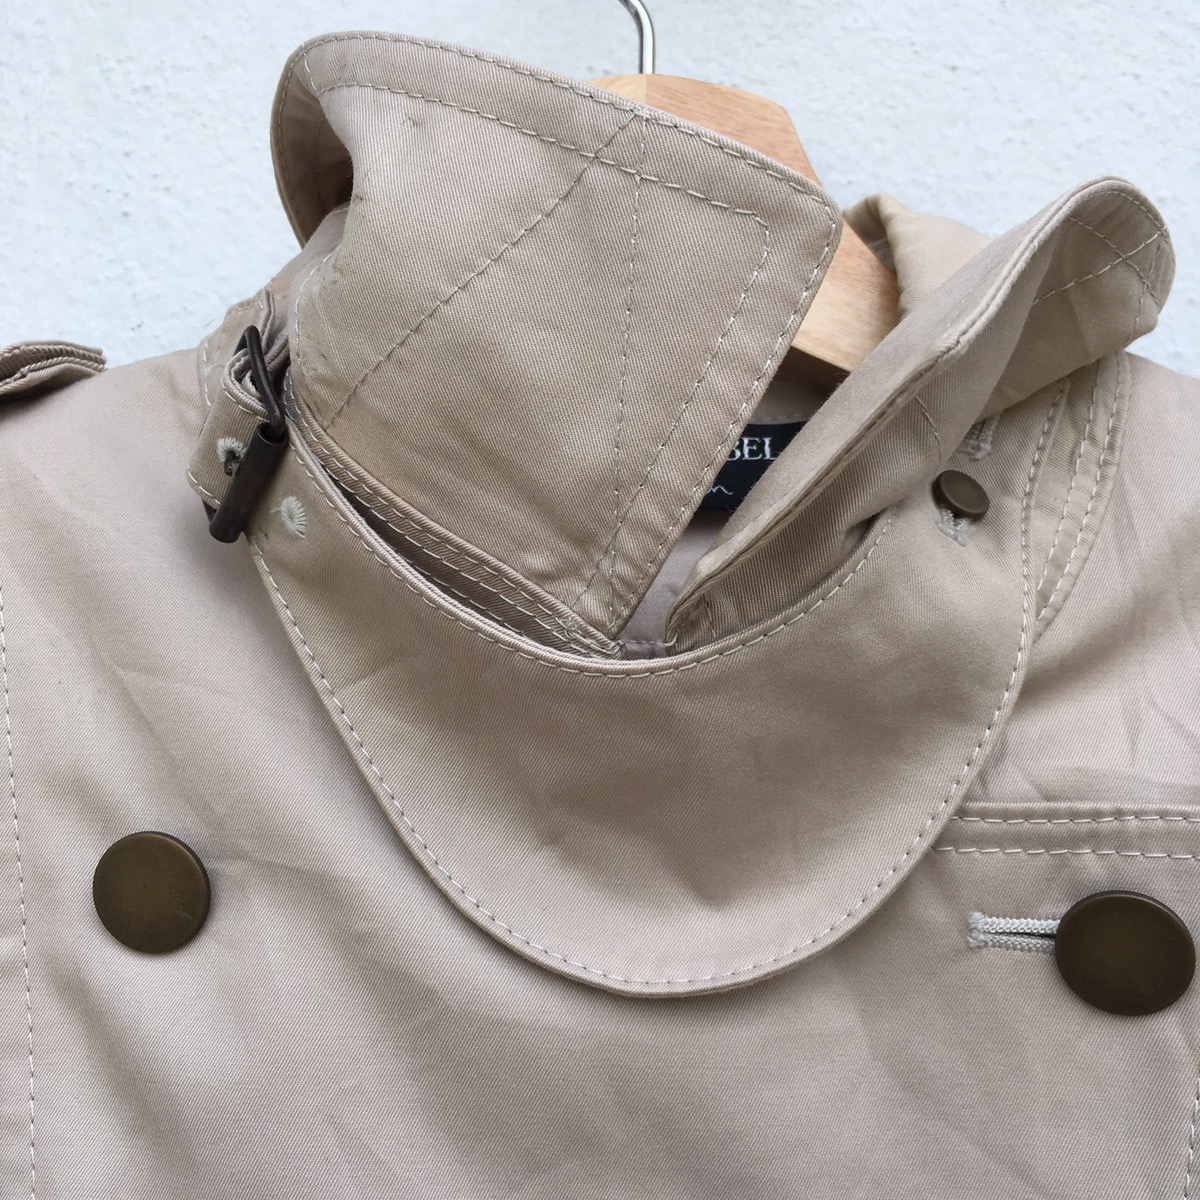 Paul Smith Belted Trench Coat - 9